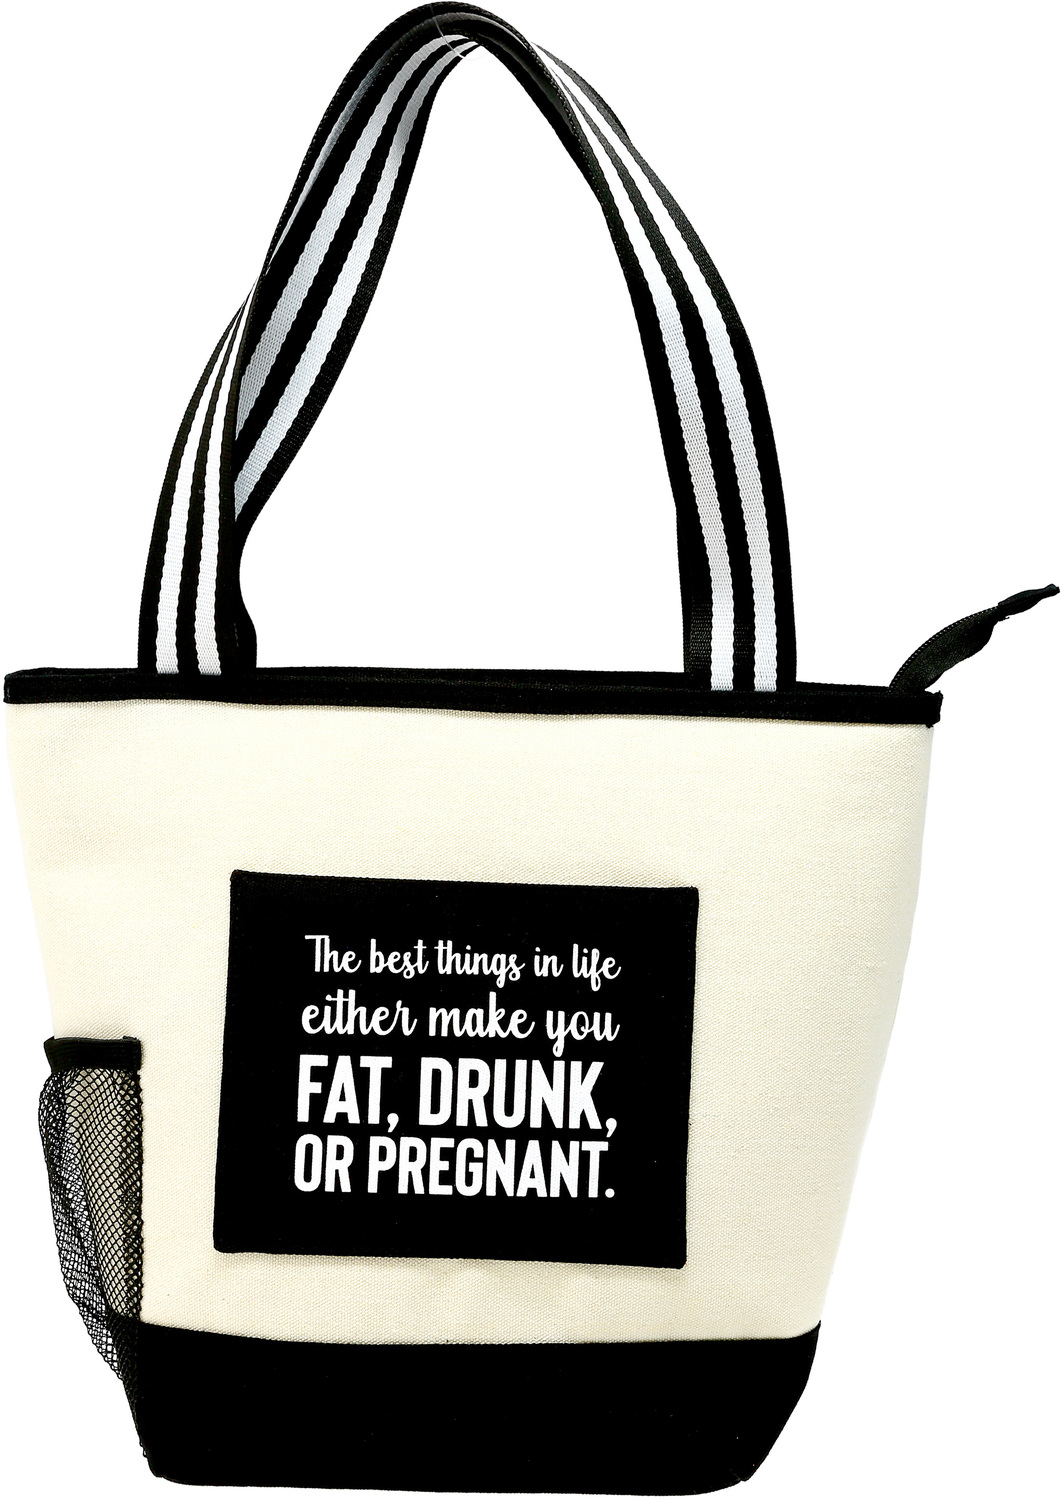 The Best Things in Life by Check Me Out - The Best Things in Life - Insulated Canvas Lunch Tote